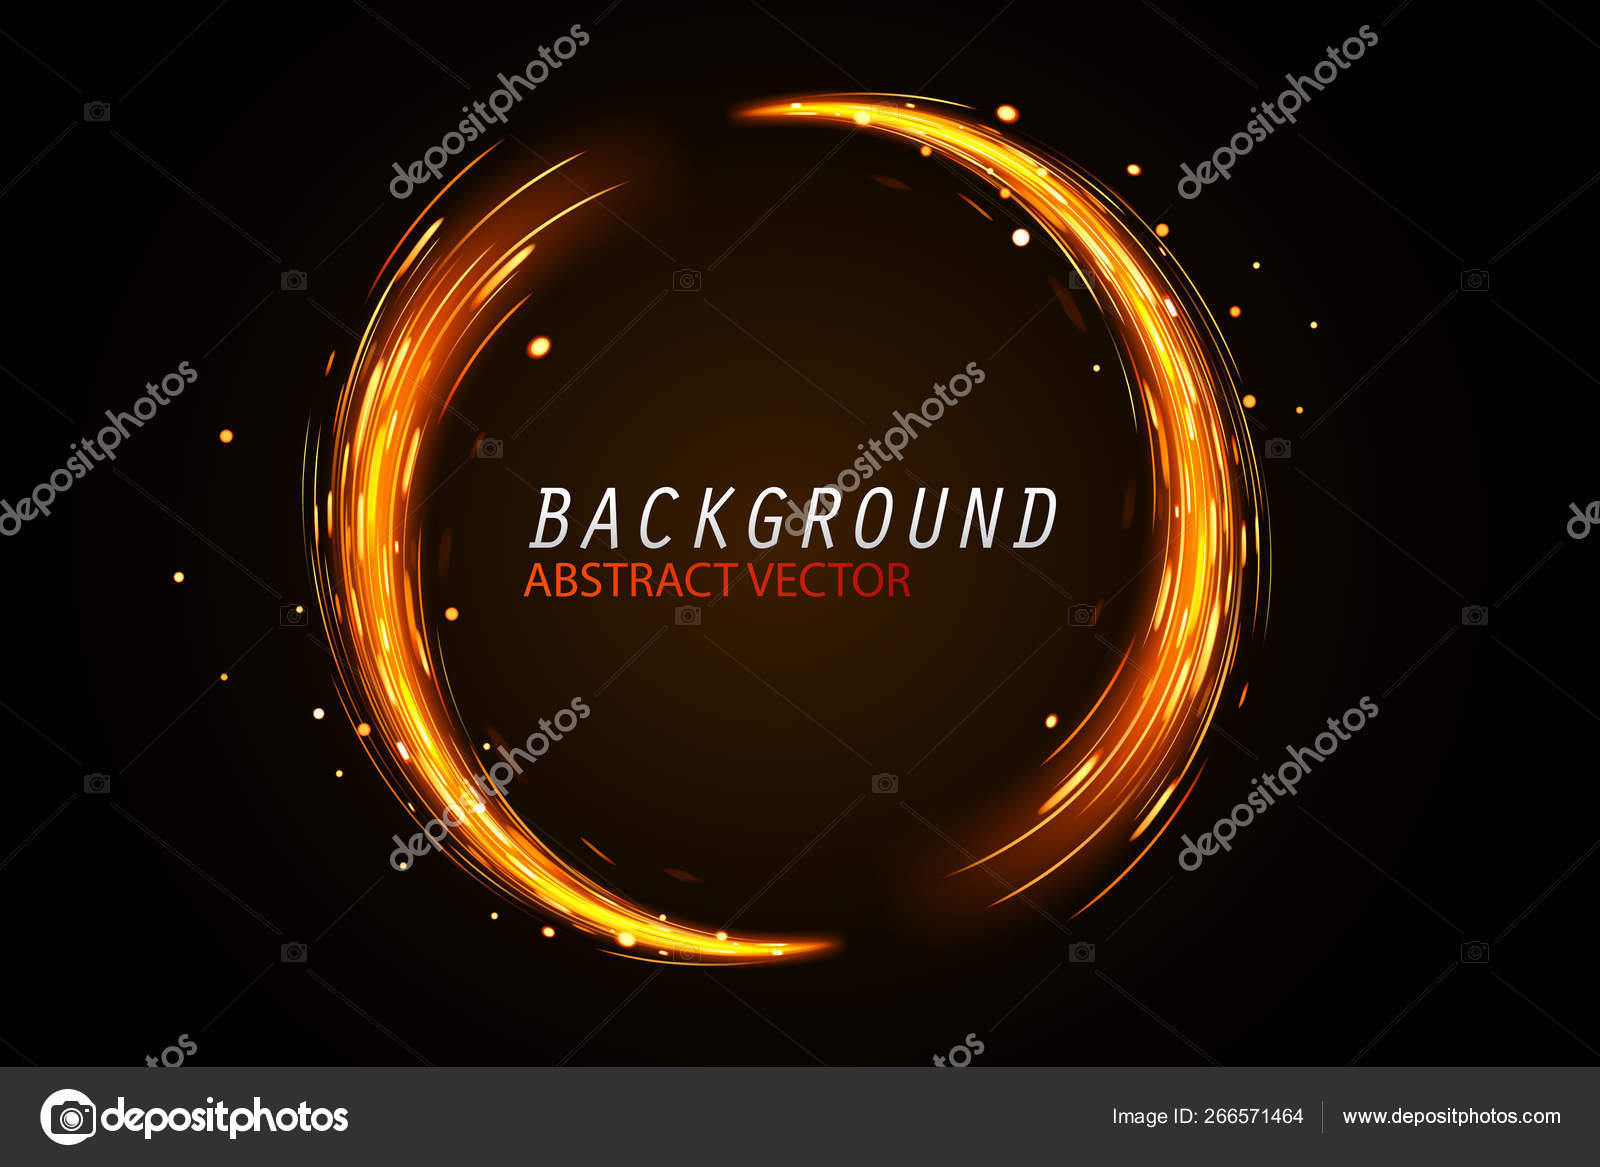 Design orange glow circle abstract background Vector Image